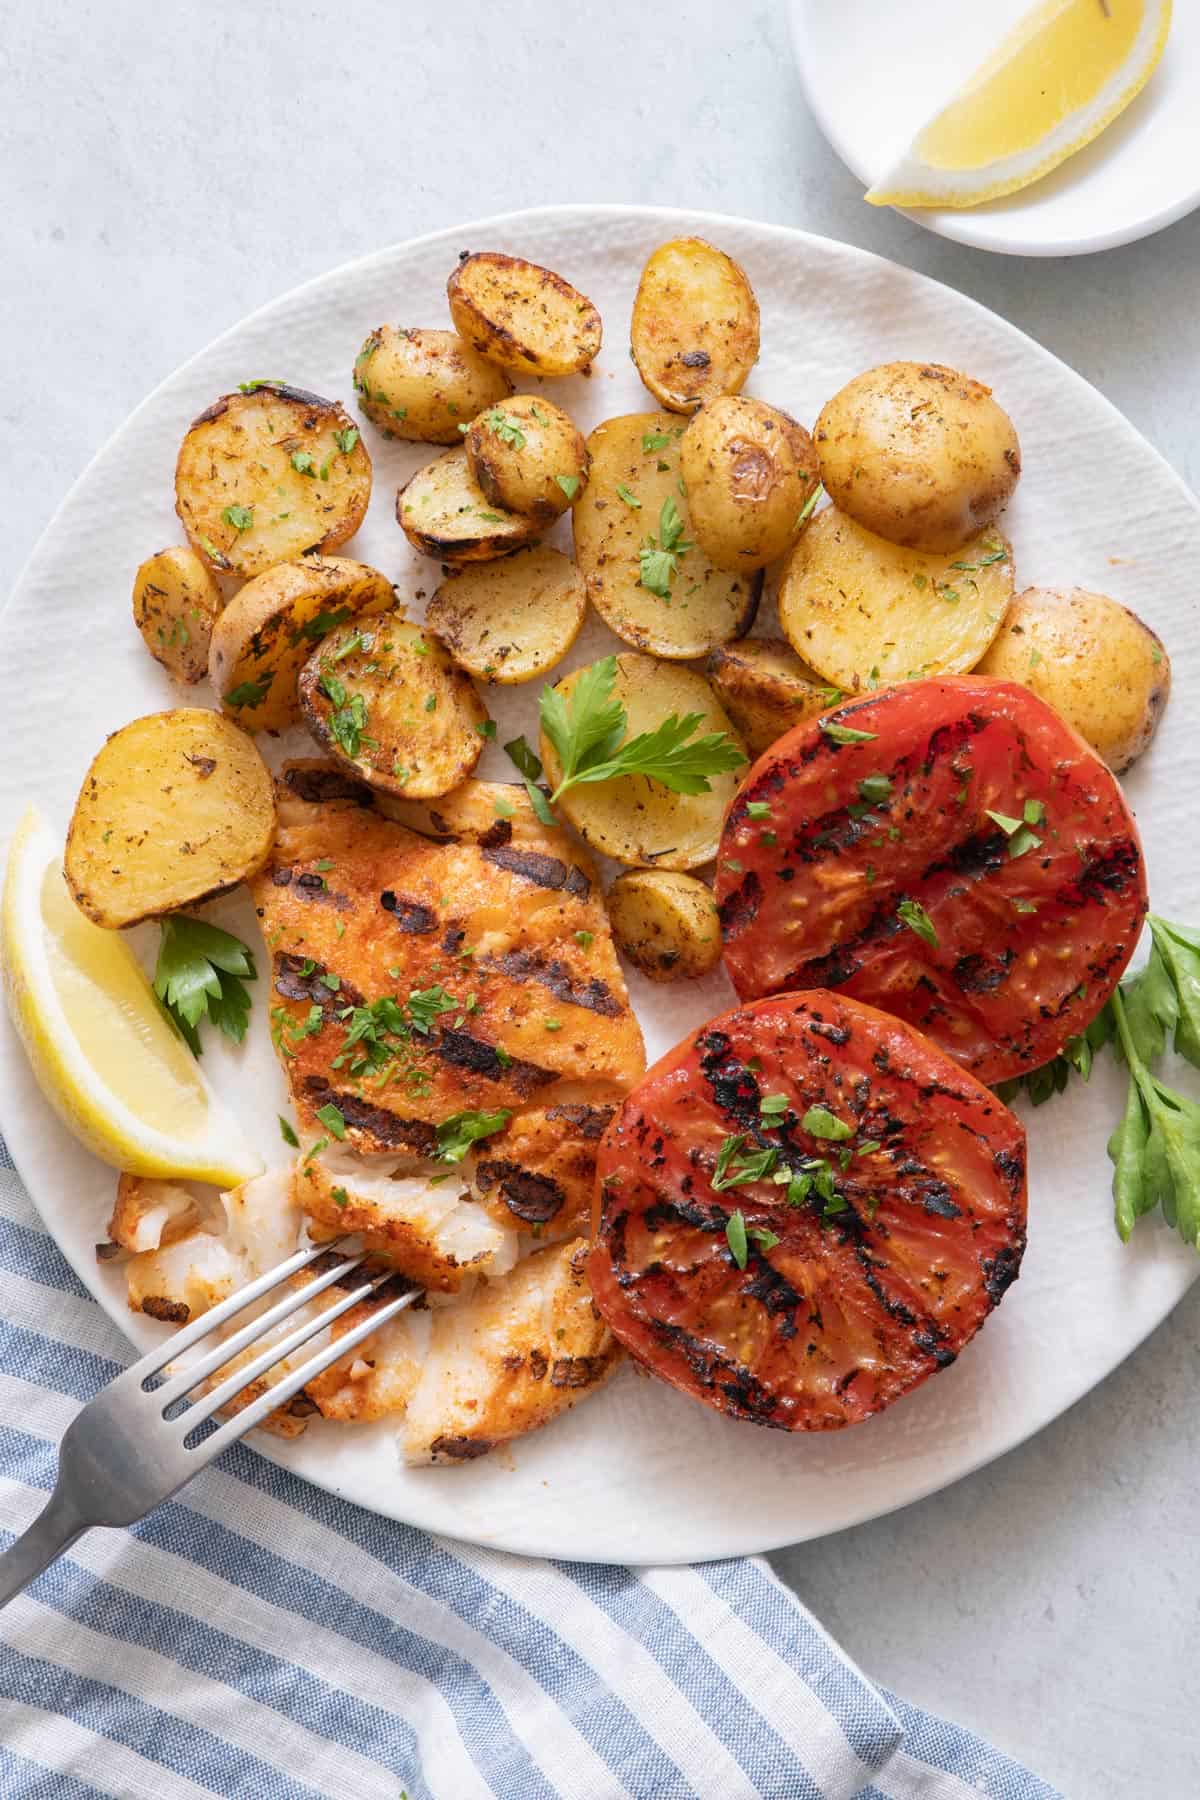 Round white plate with cod fillet with fork flaking a piece away, and plated with grilled halved baby potatoes and grilled halved tomatoes garnished with a lemon wedge and parsley..